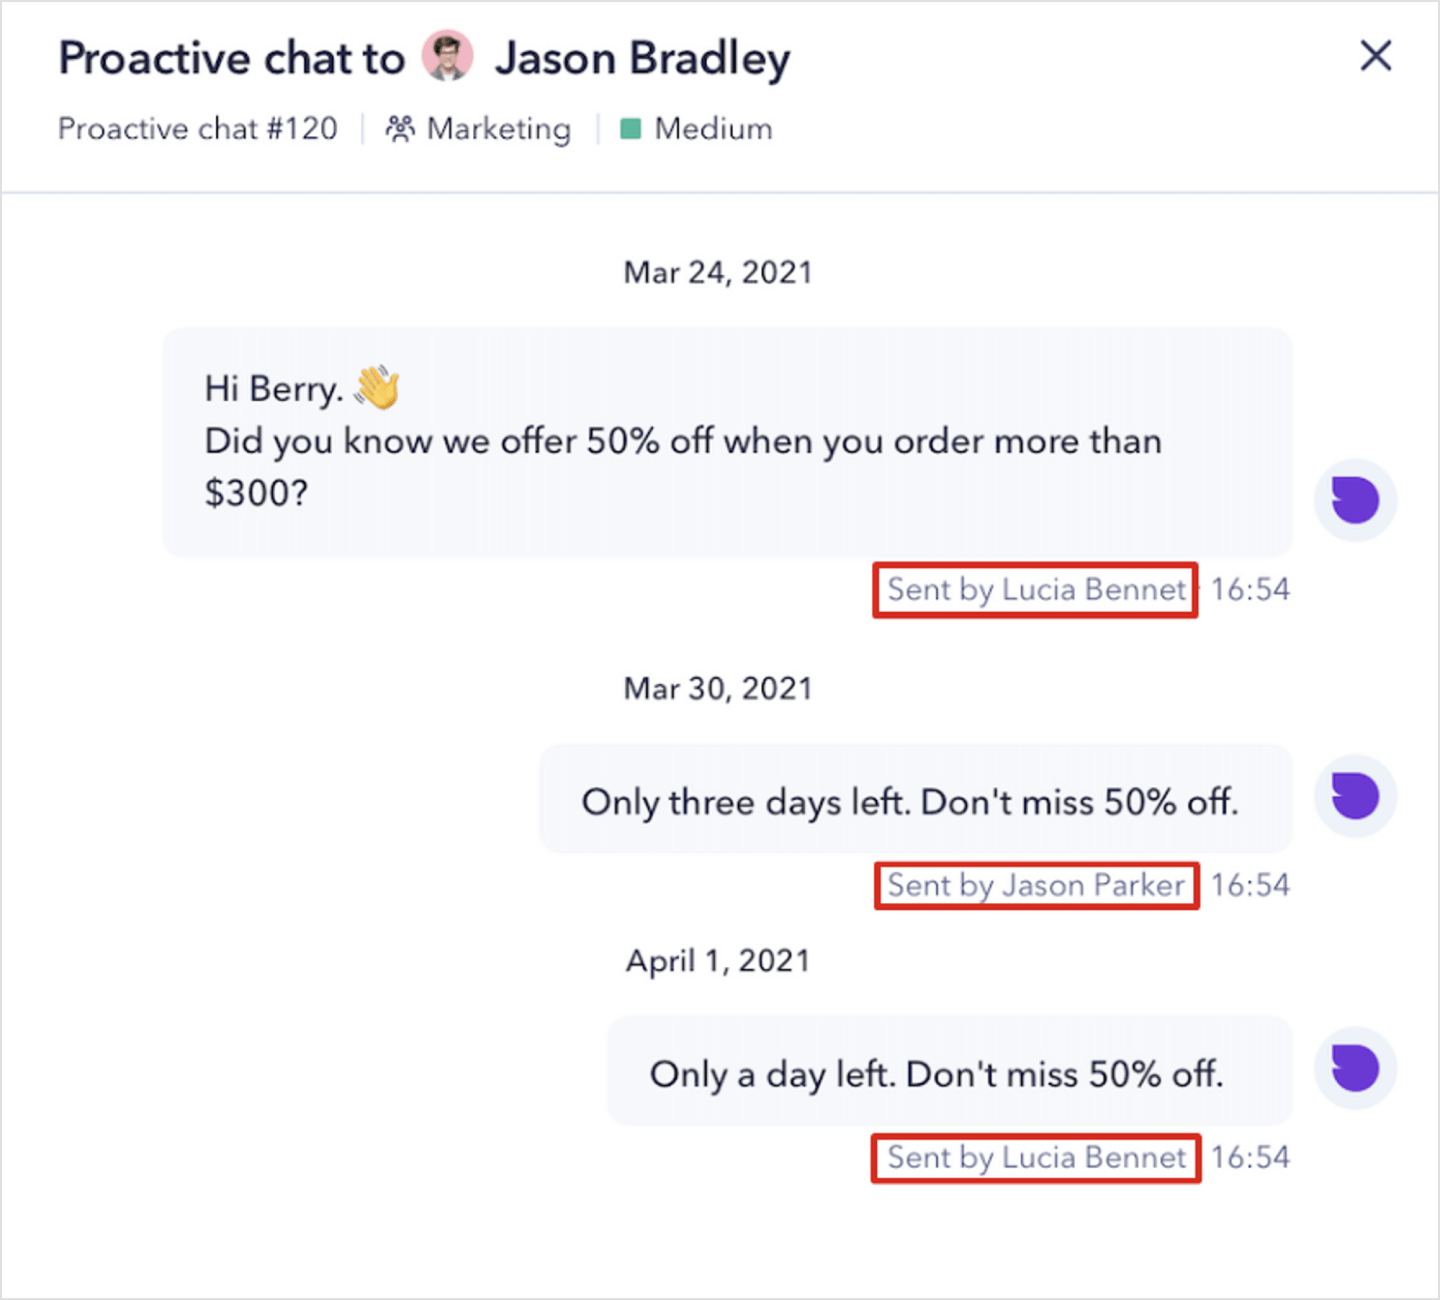 Image|Chat view showing different senders of proactive messages.